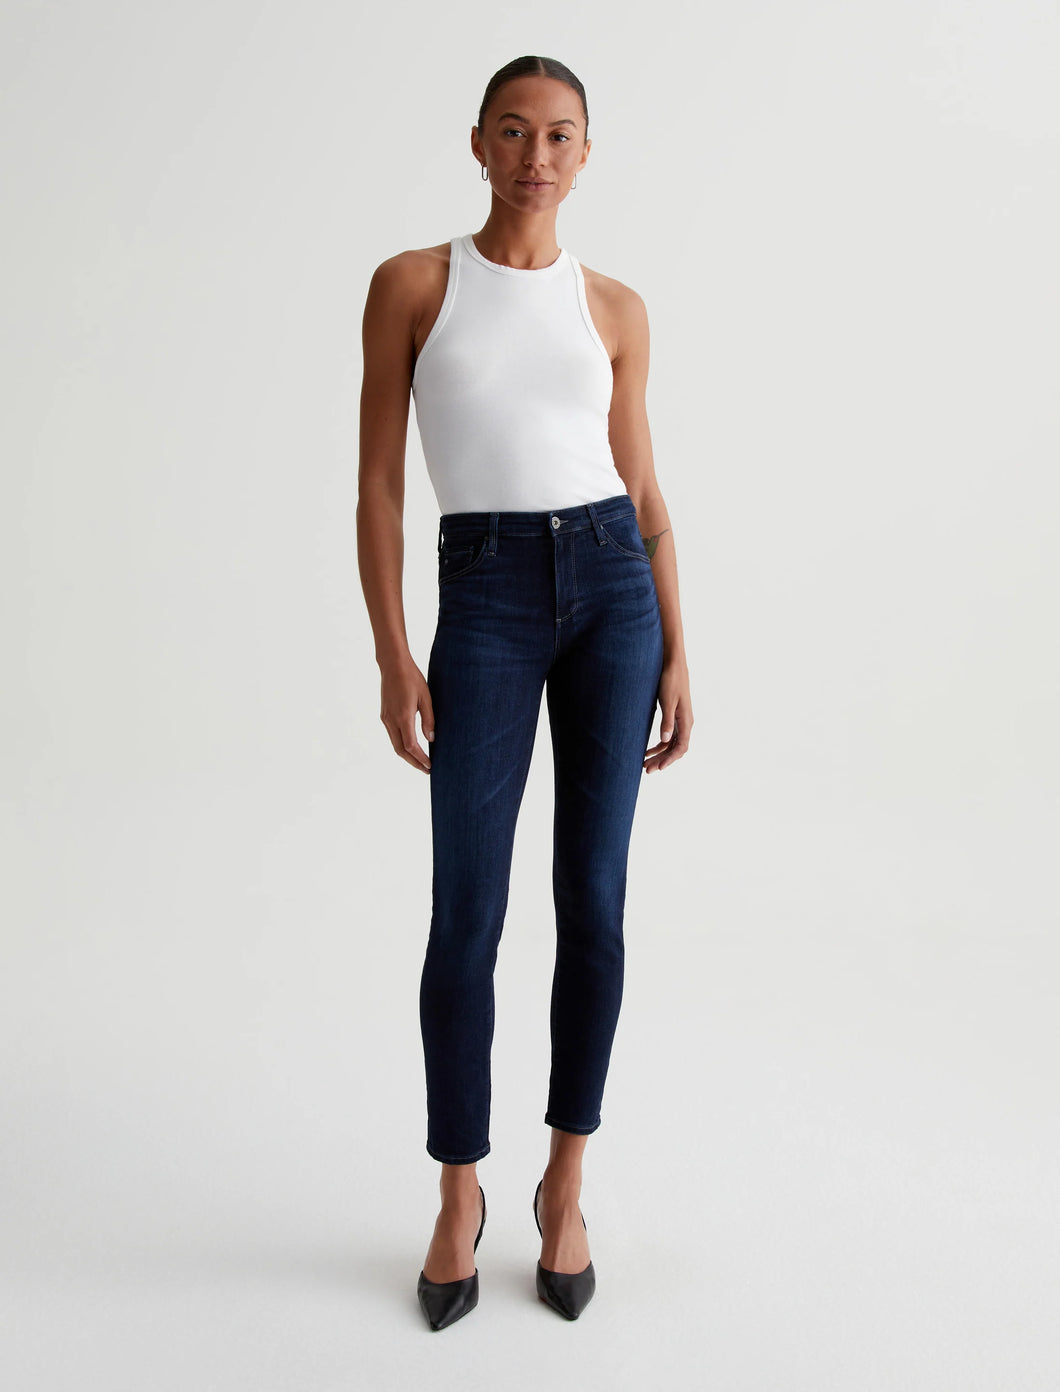 The Prima Jean by AG in Concord